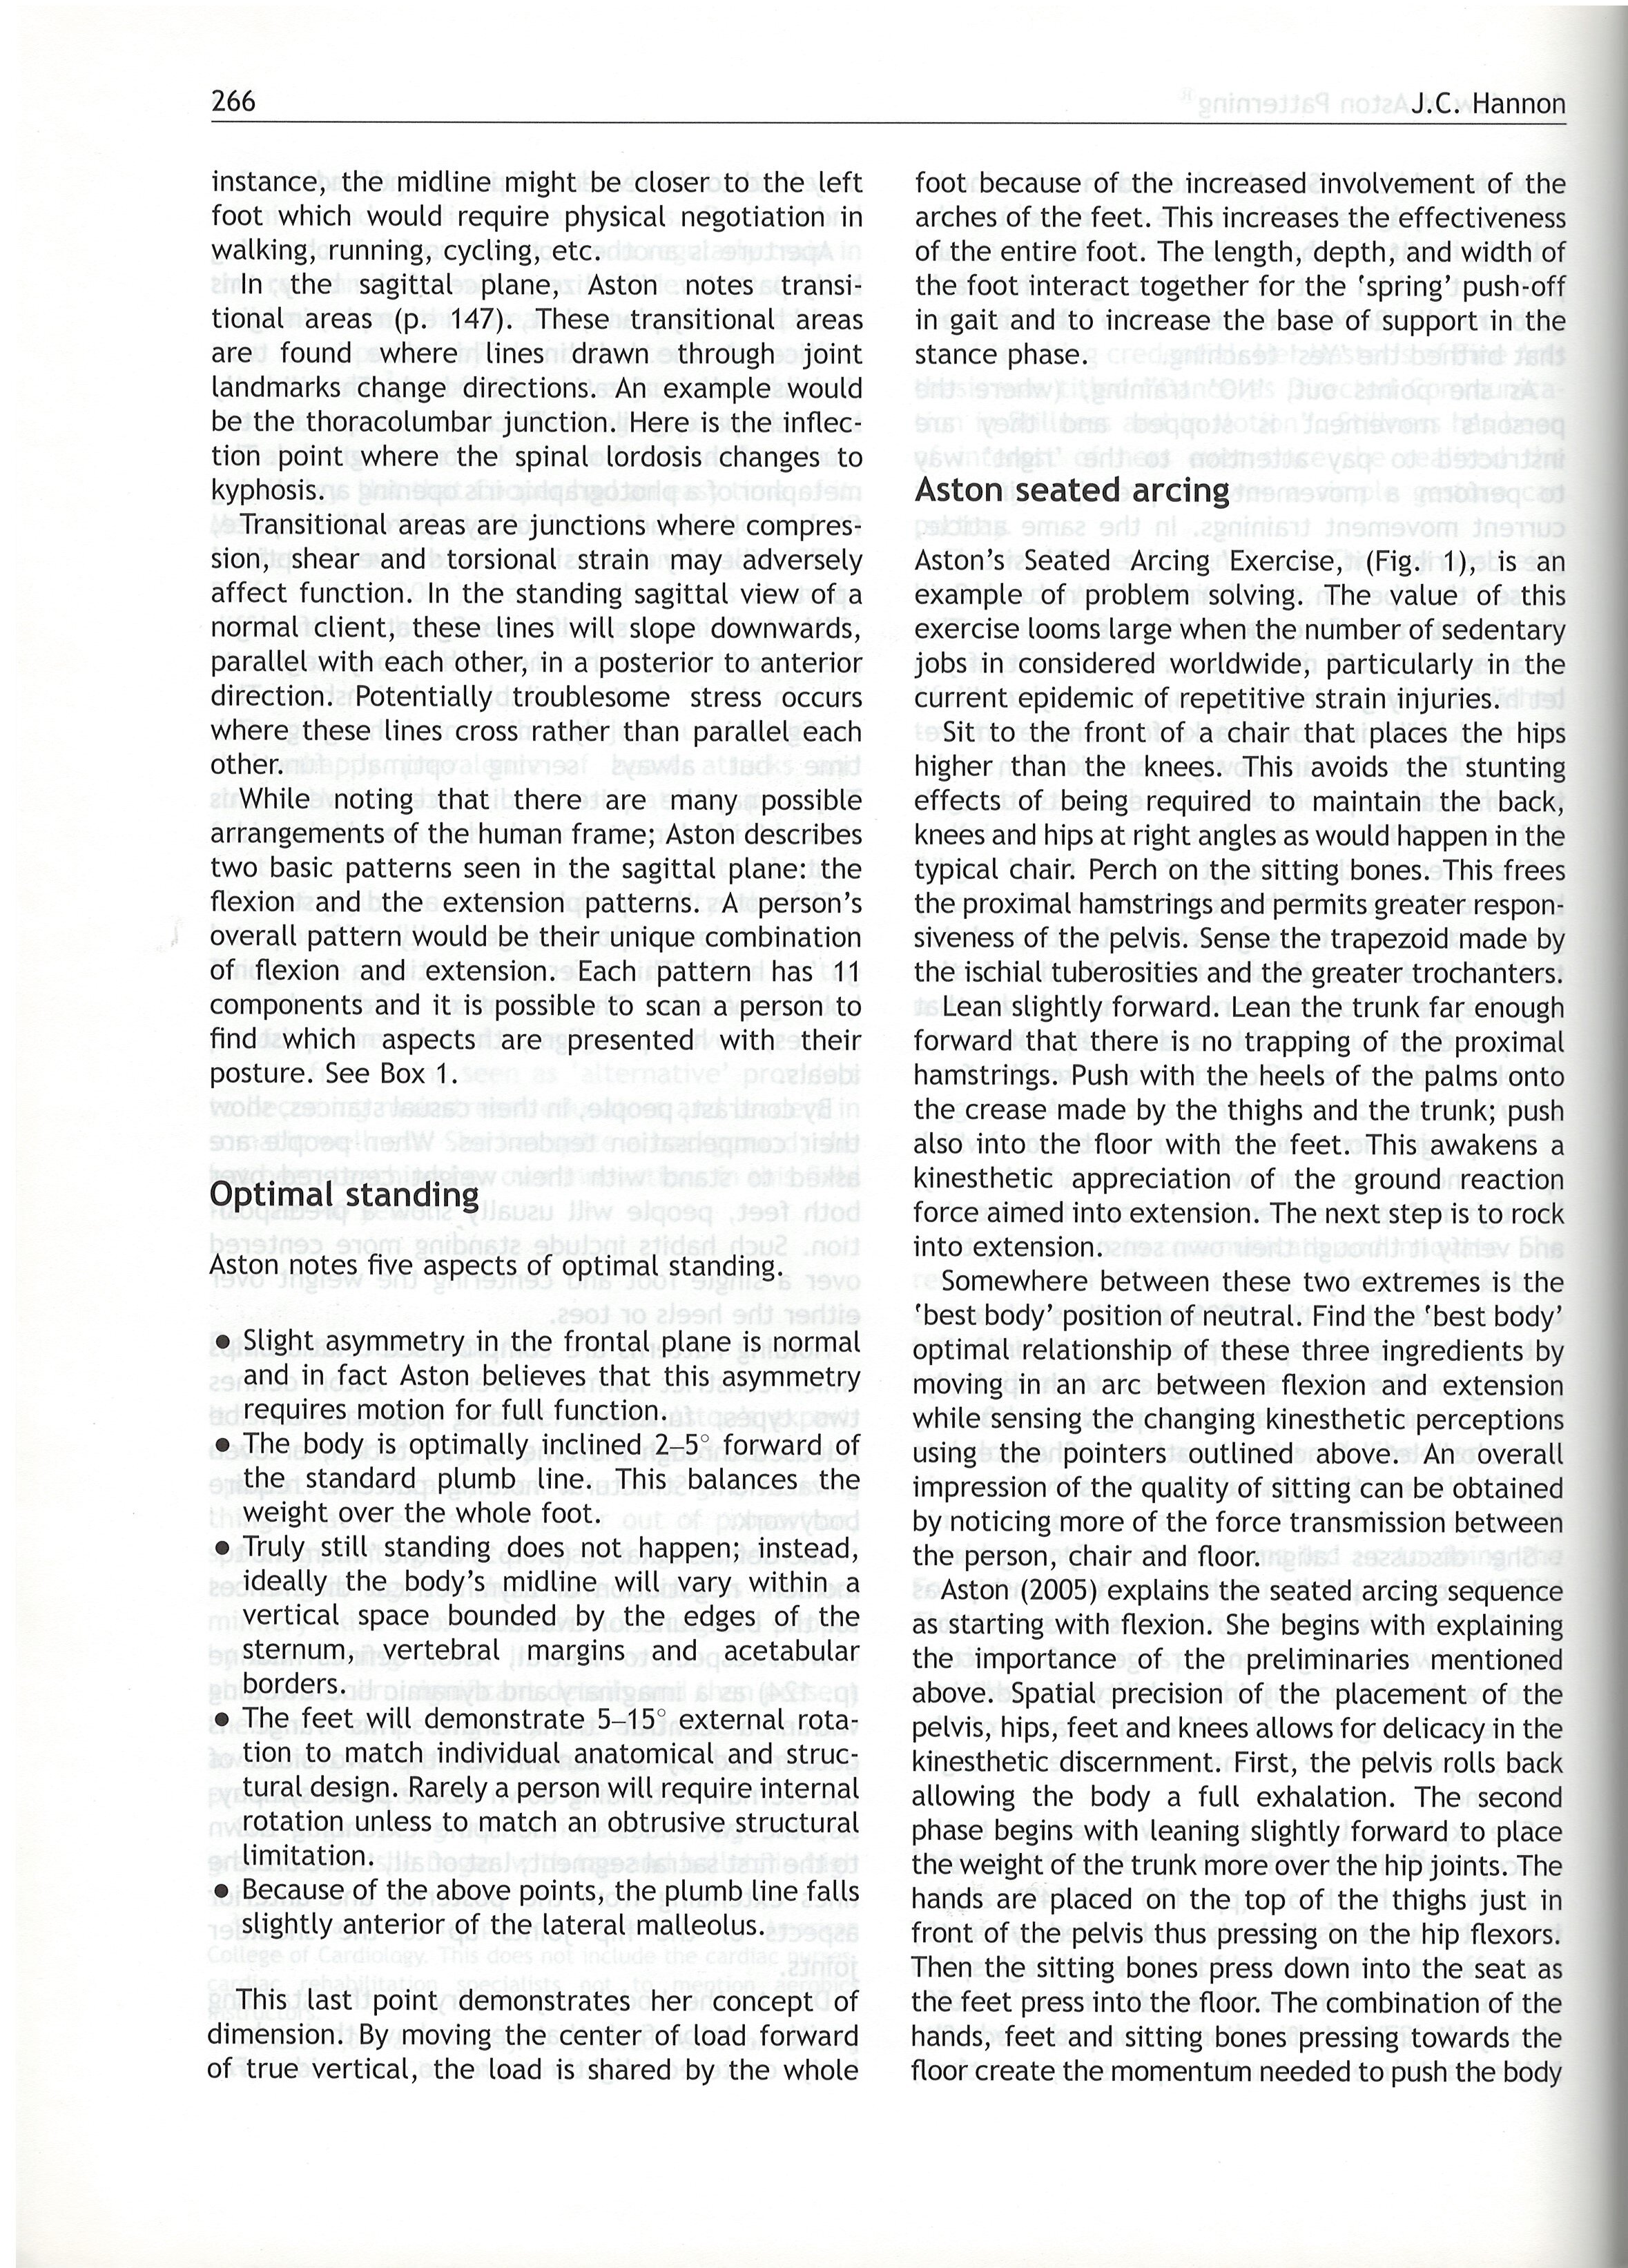 Journal of Bodywork and Movement Therapies 2005.7.jpg